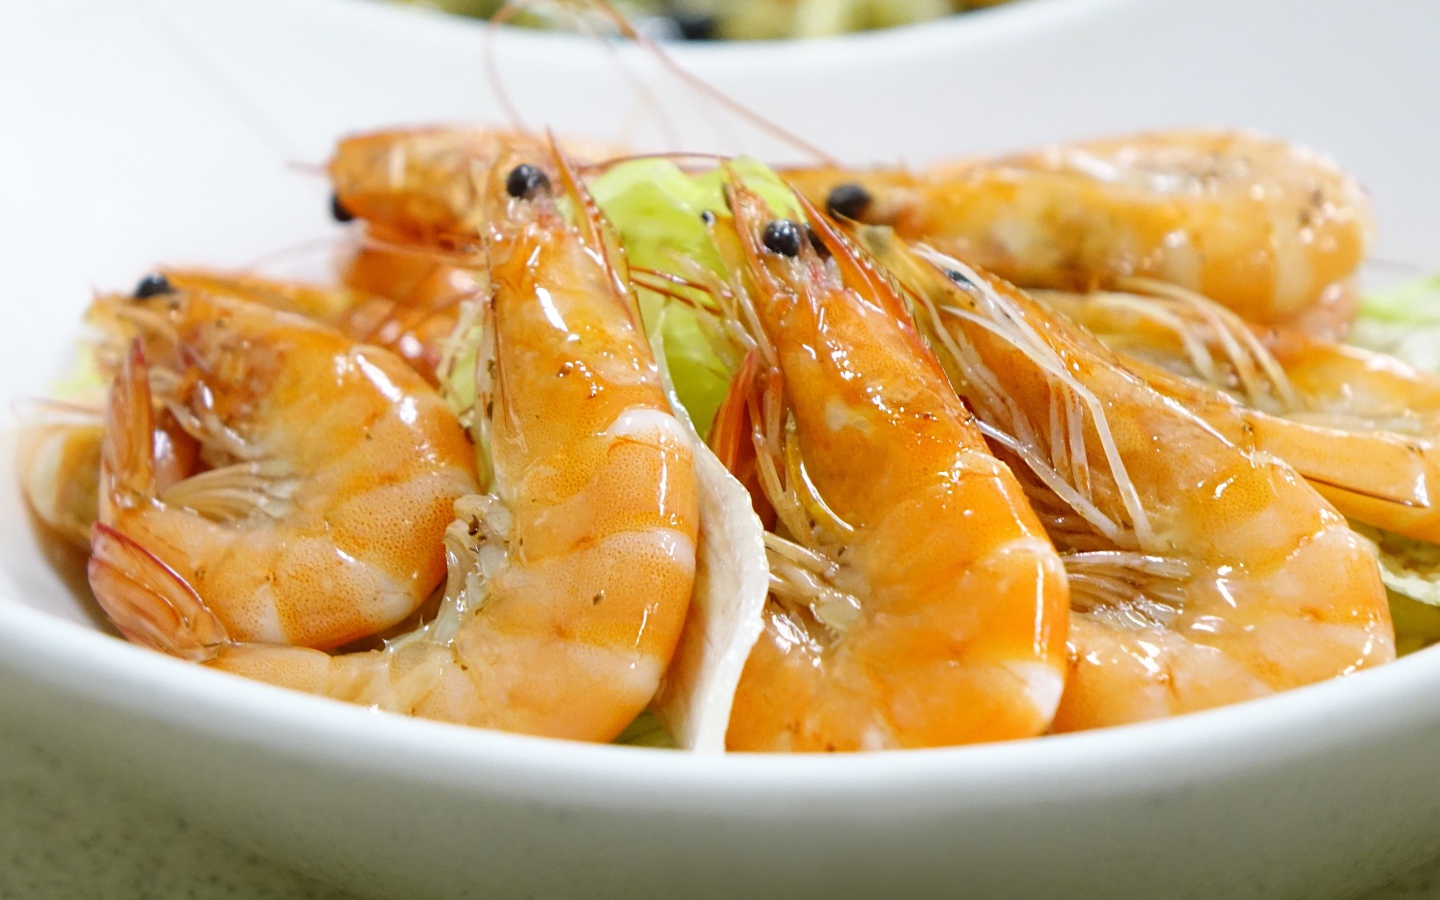 Boiled shrimps in a plate